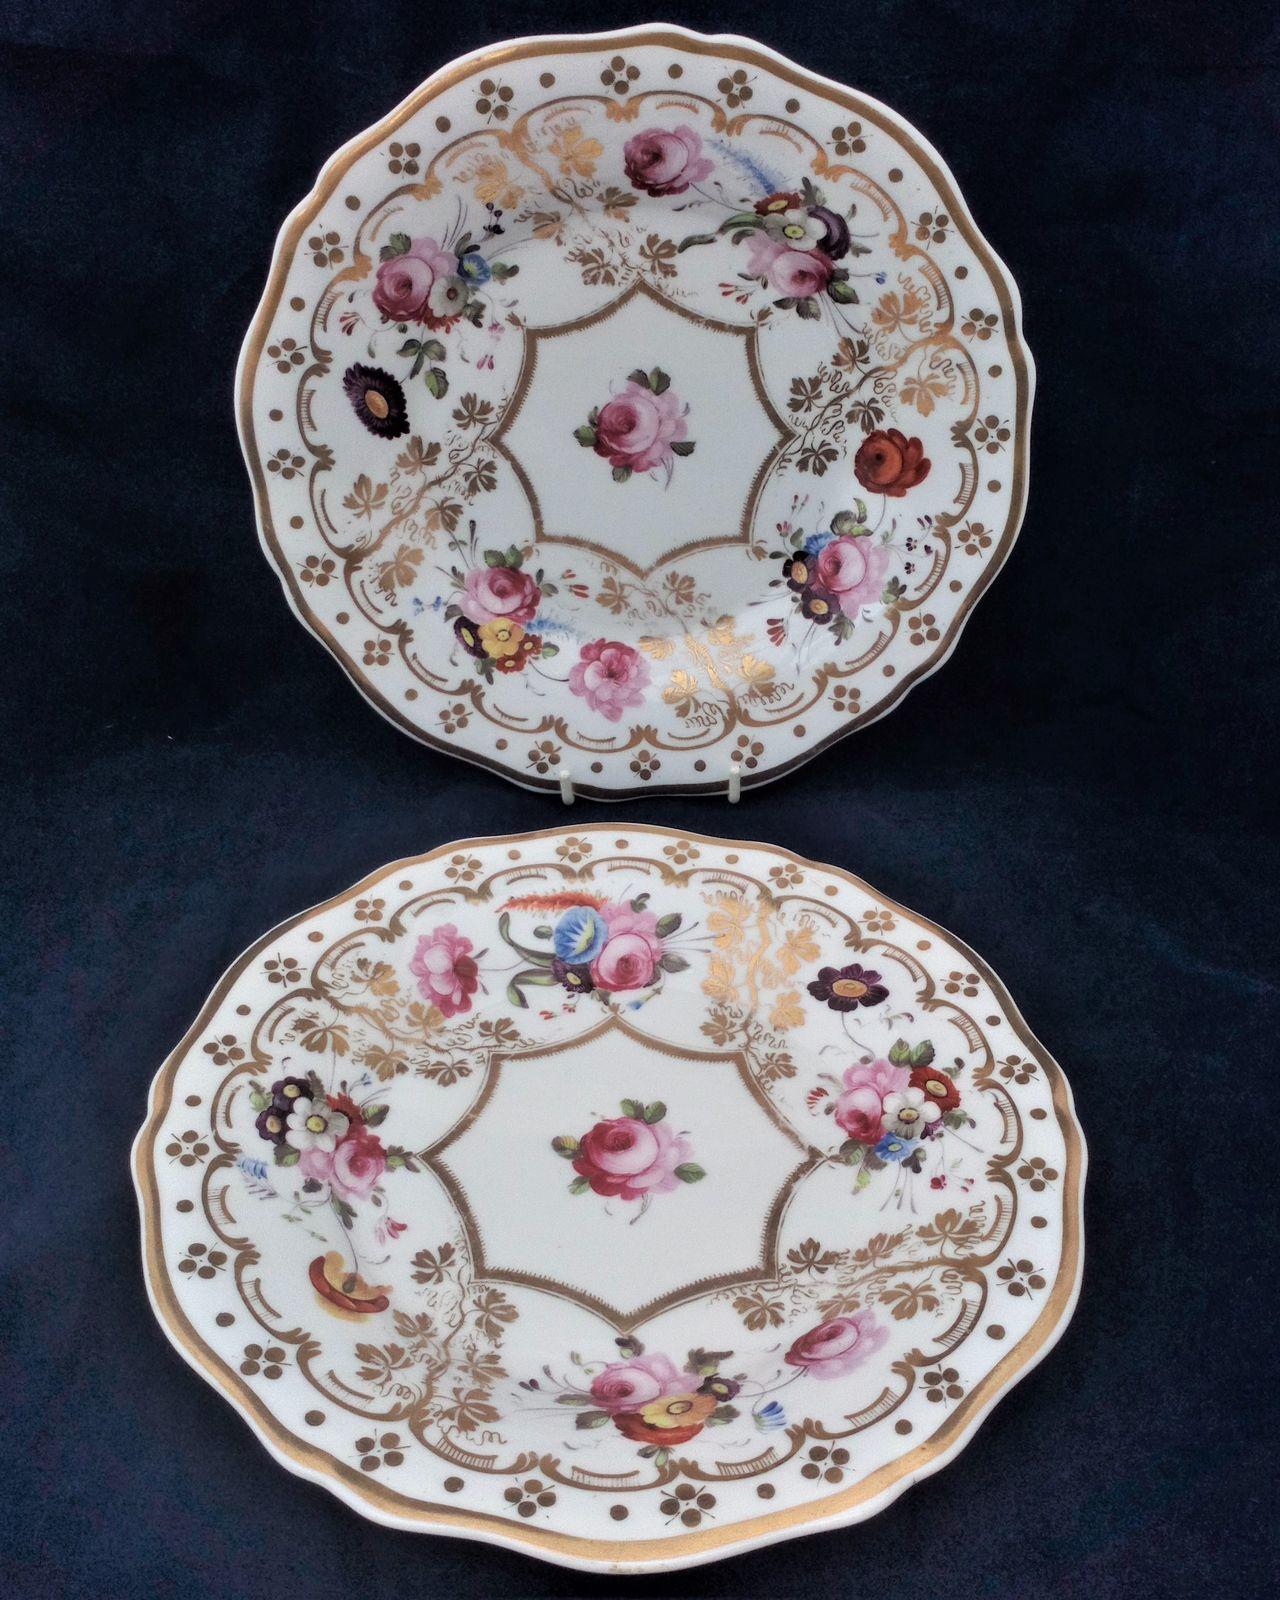 Antique Pair of John and William Ridgway Porcelain Plates Hand Painted Floral Pattern and ornate gilding with vines circa 1825.